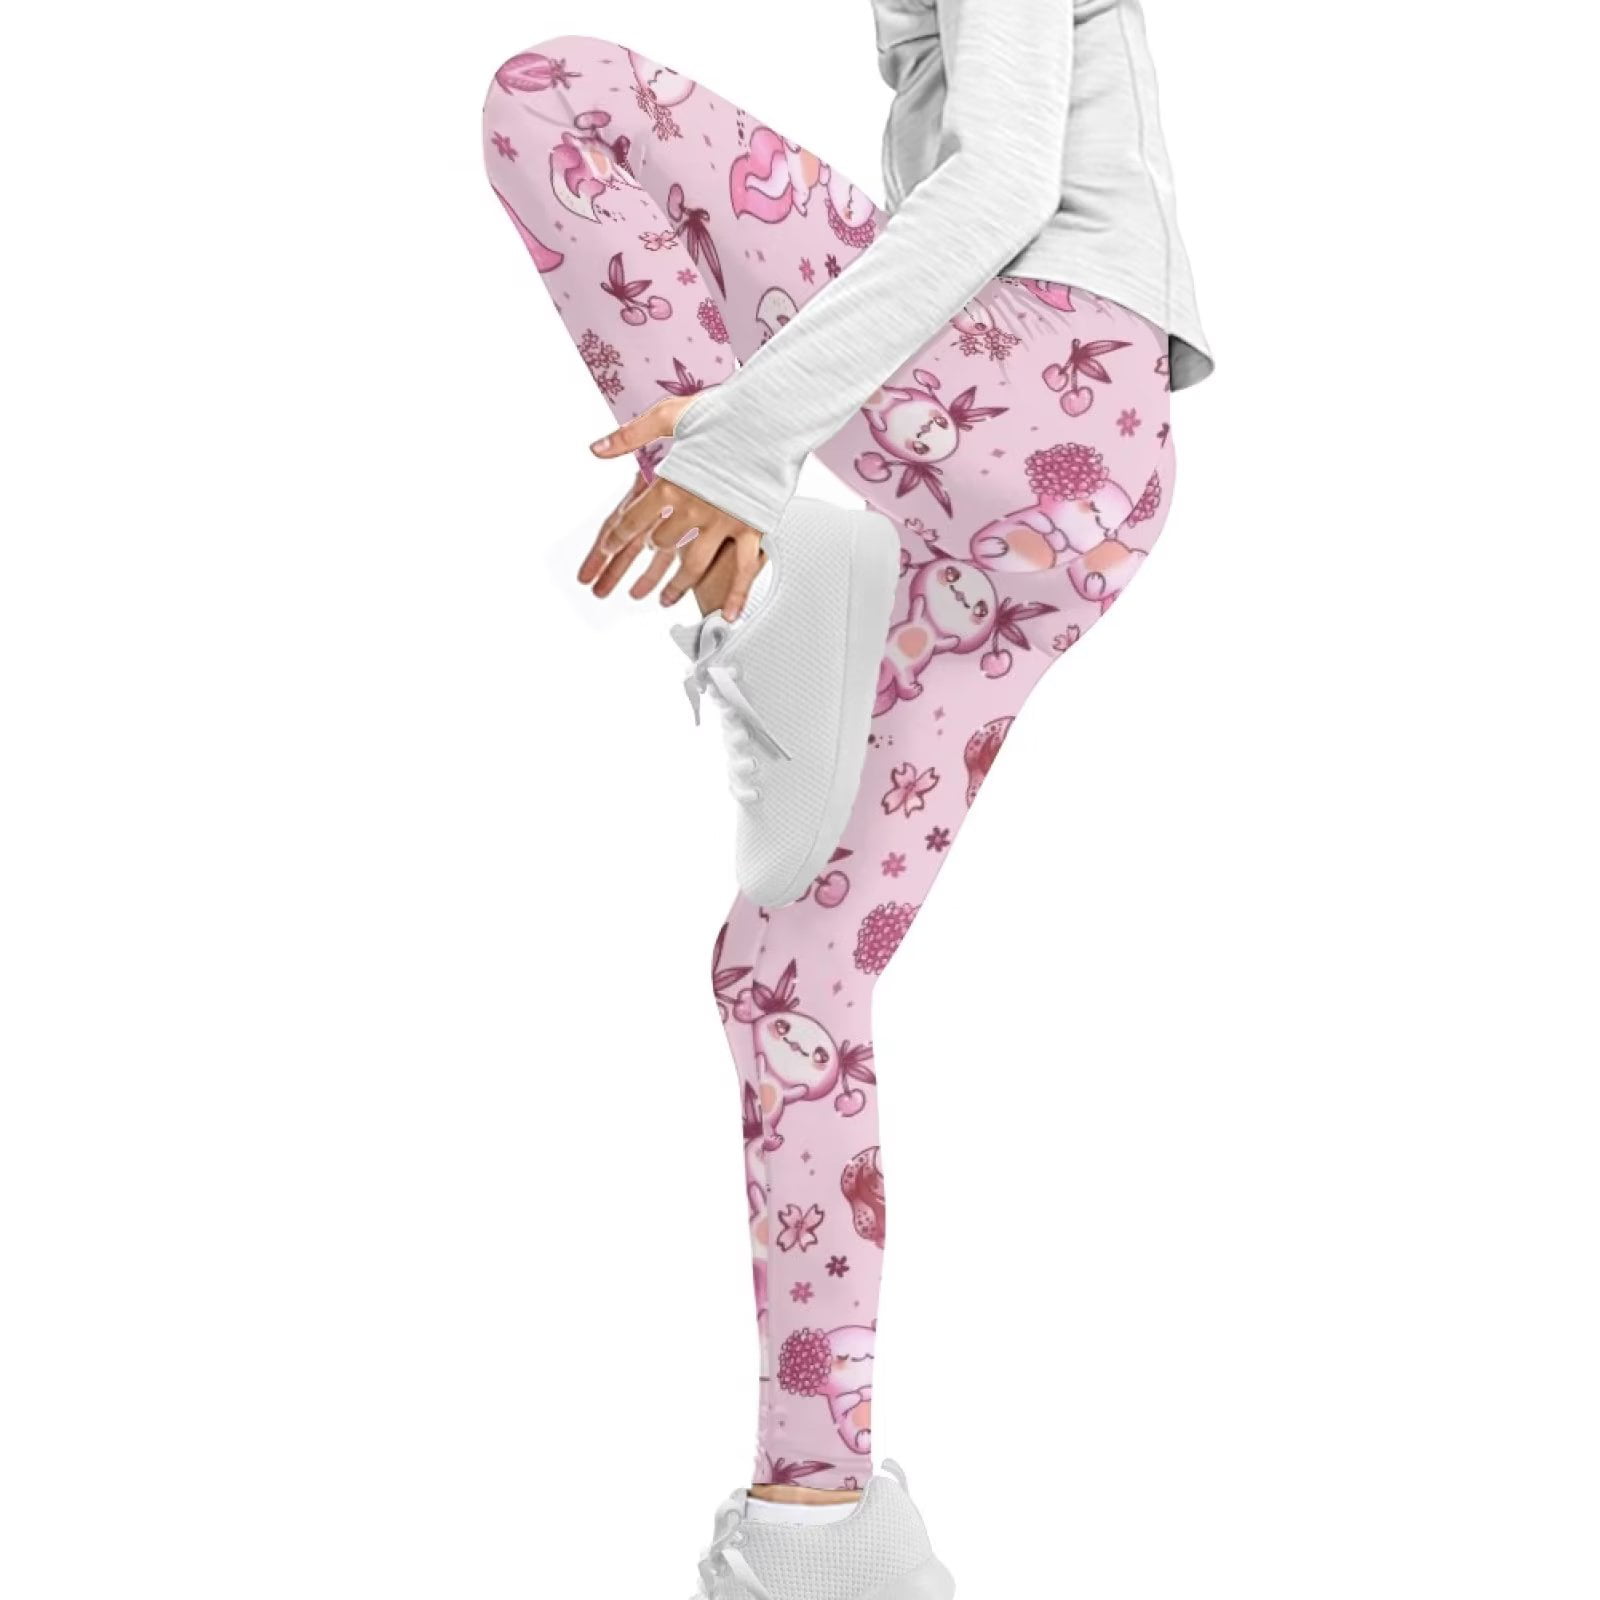 FKELYI Pink Floral Axolotl Kids Legging Size 12-13 Years